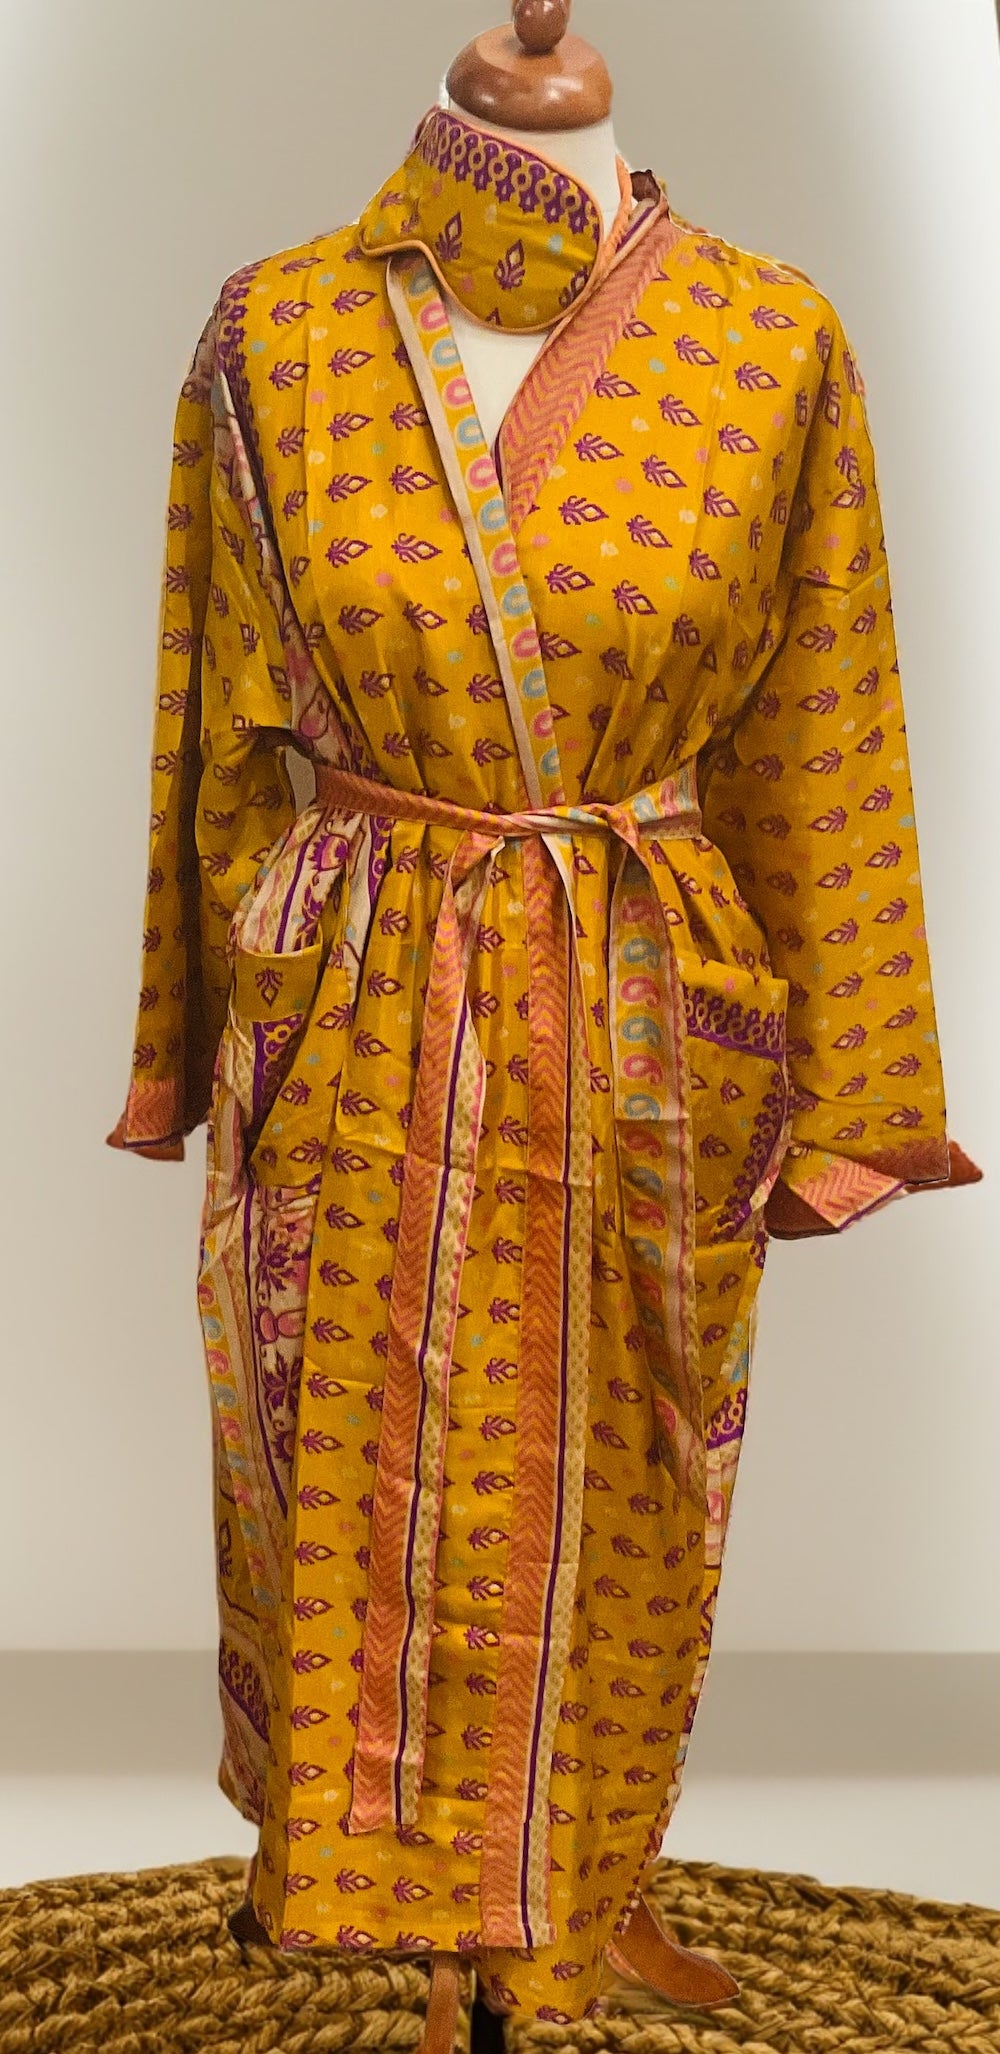 Yellow Recycled Sari Dressing Gown Second Nature Online